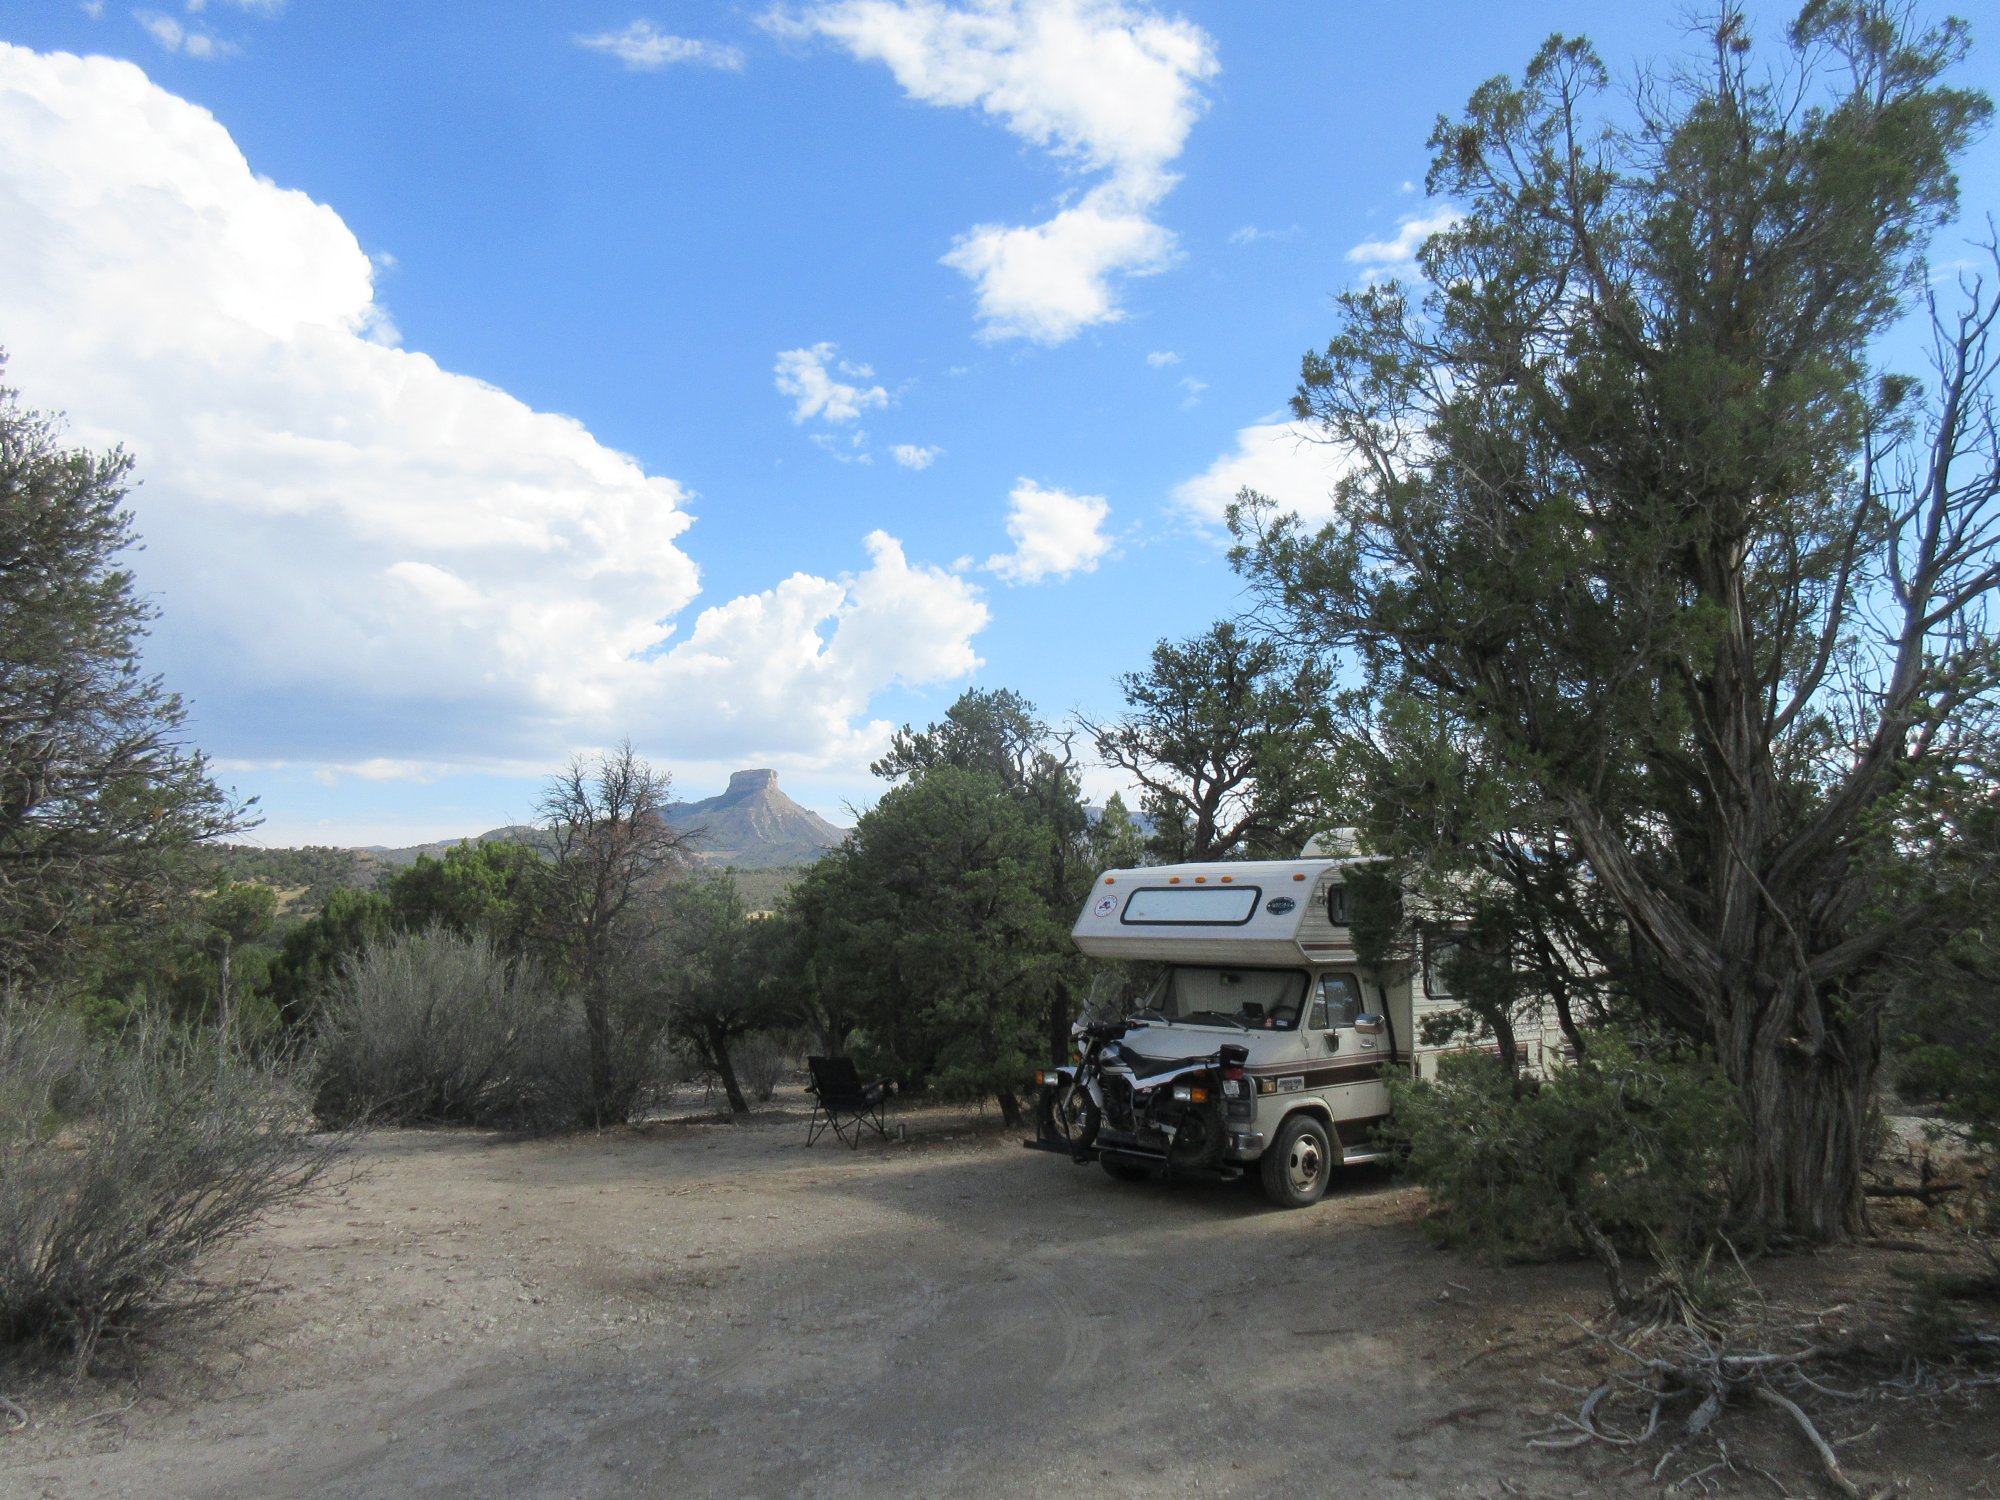 Protecting Our Public Lands: The RVers Boondocking Policy 2